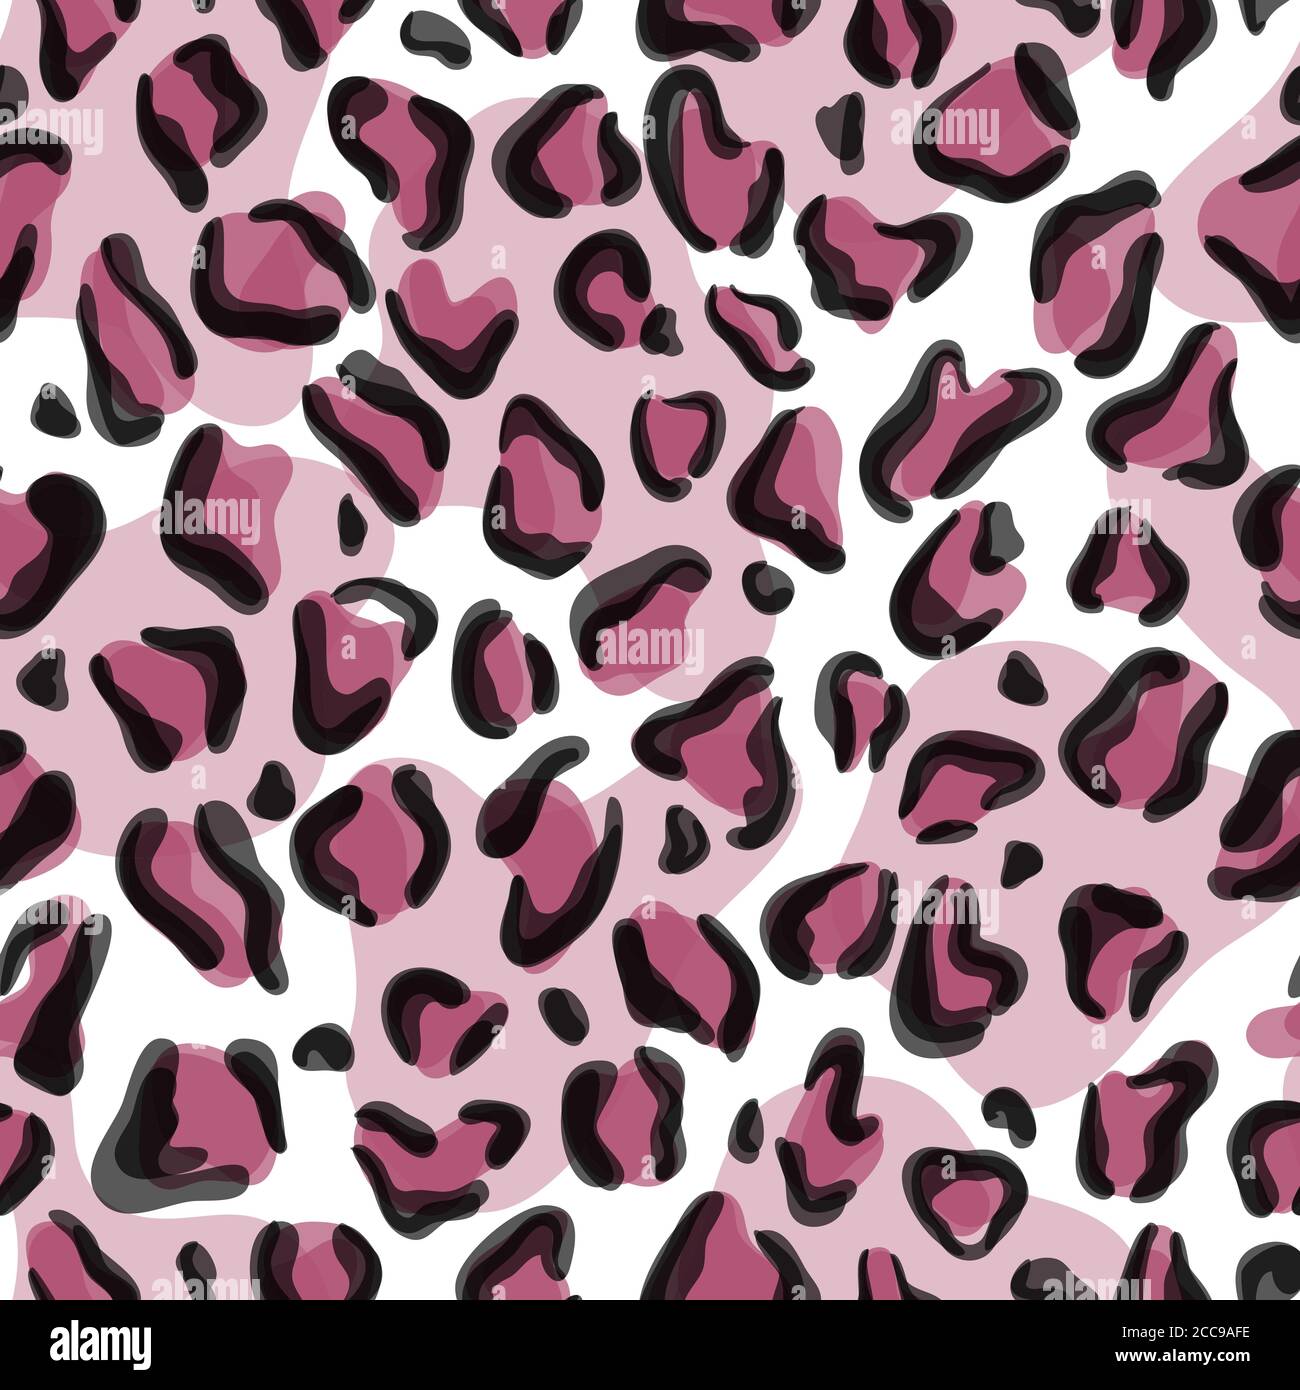 Leopard pink Stock Vector Images - Alamy